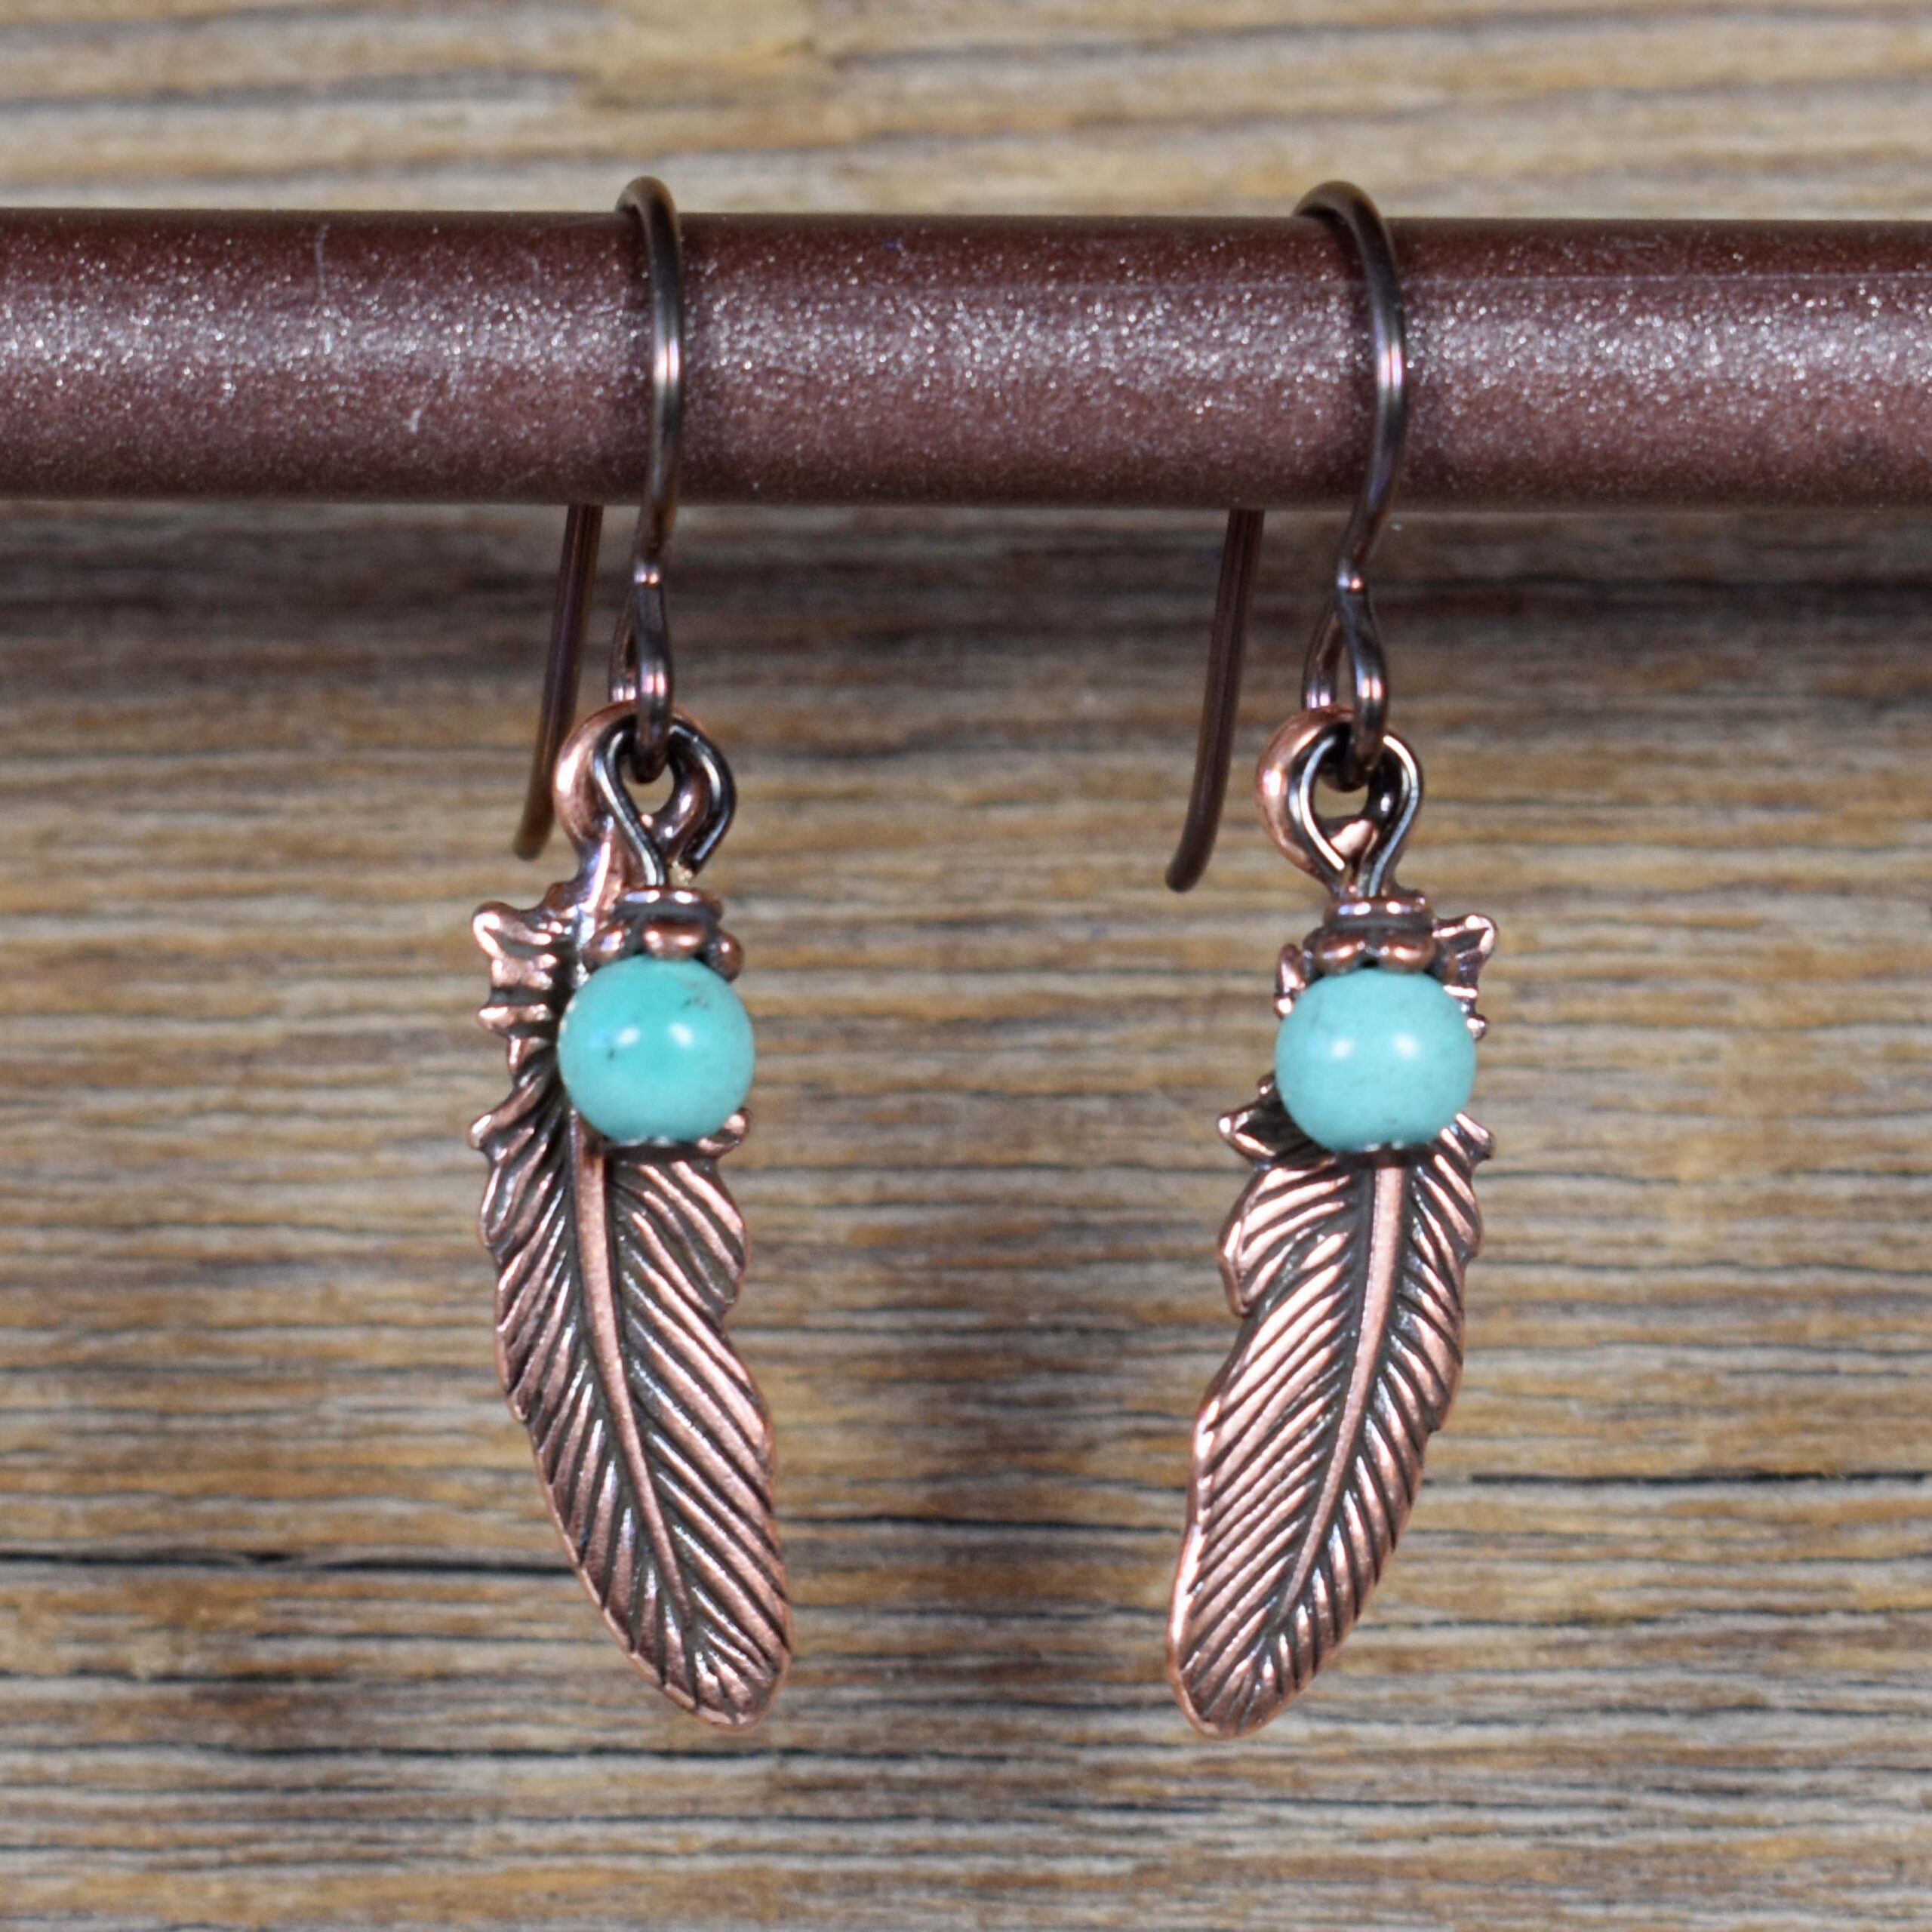 Handmade small feather earrings with turquoise and pearl - chloe michell  jewellery